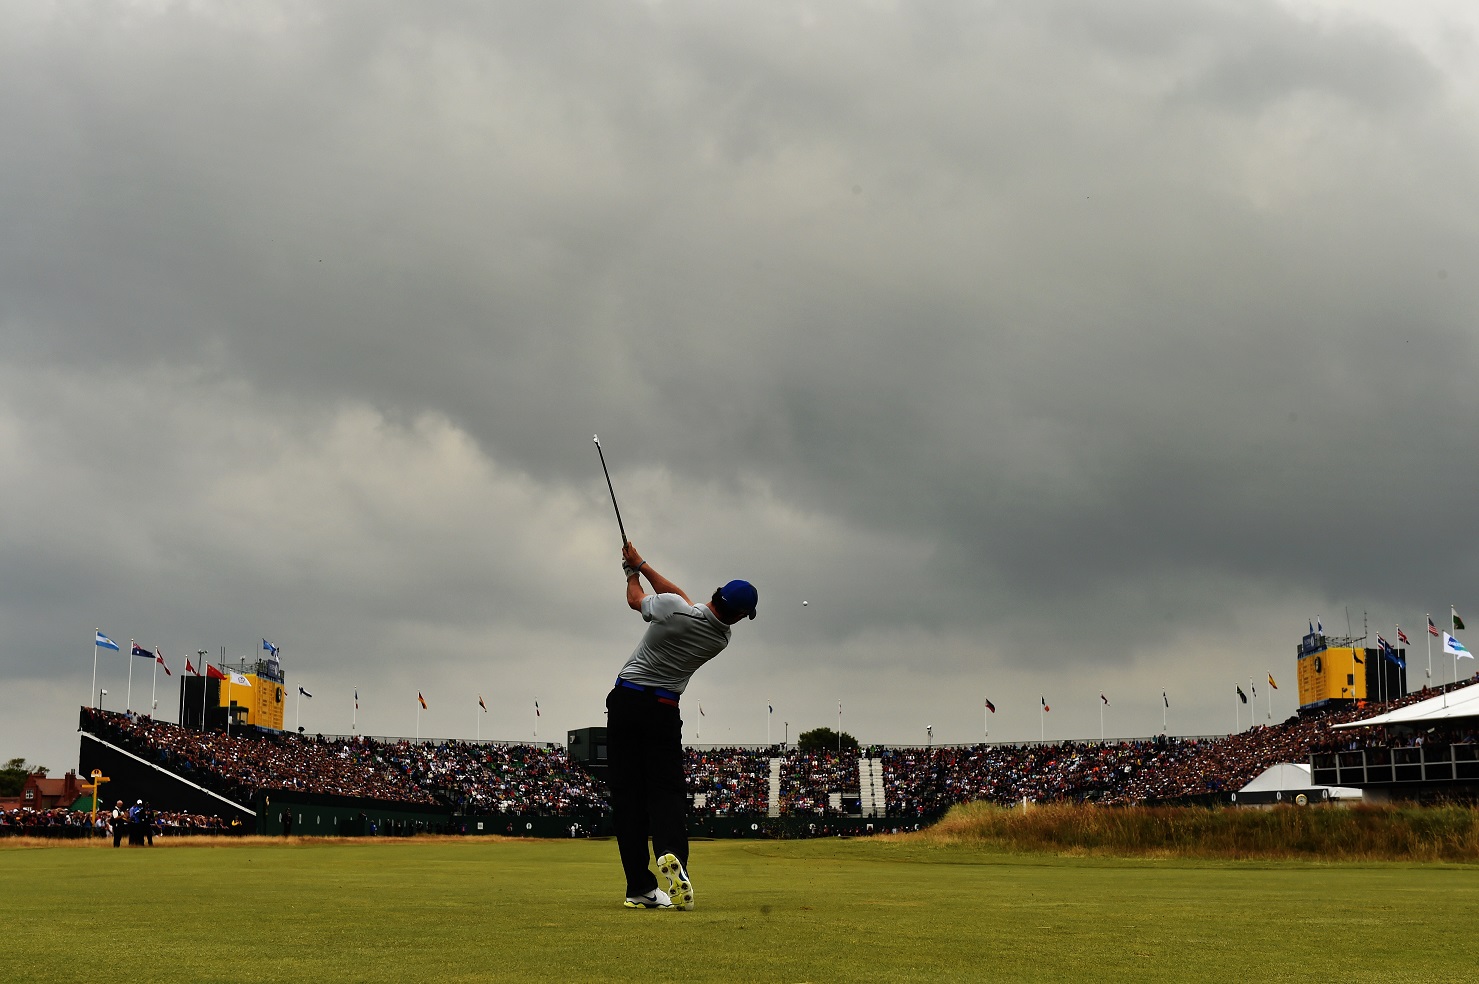 HOYLAKE, ENGLAND - JULY 19:  Rory McIlroy of Northern Ireland plays his second shot on the 18th hole during the third round of The 143rd Open Championship at Royal Liverpool on July 19, 2014 in Hoylake, England.  (Photo by David Cannon/R&A/R&A via Getty Images)